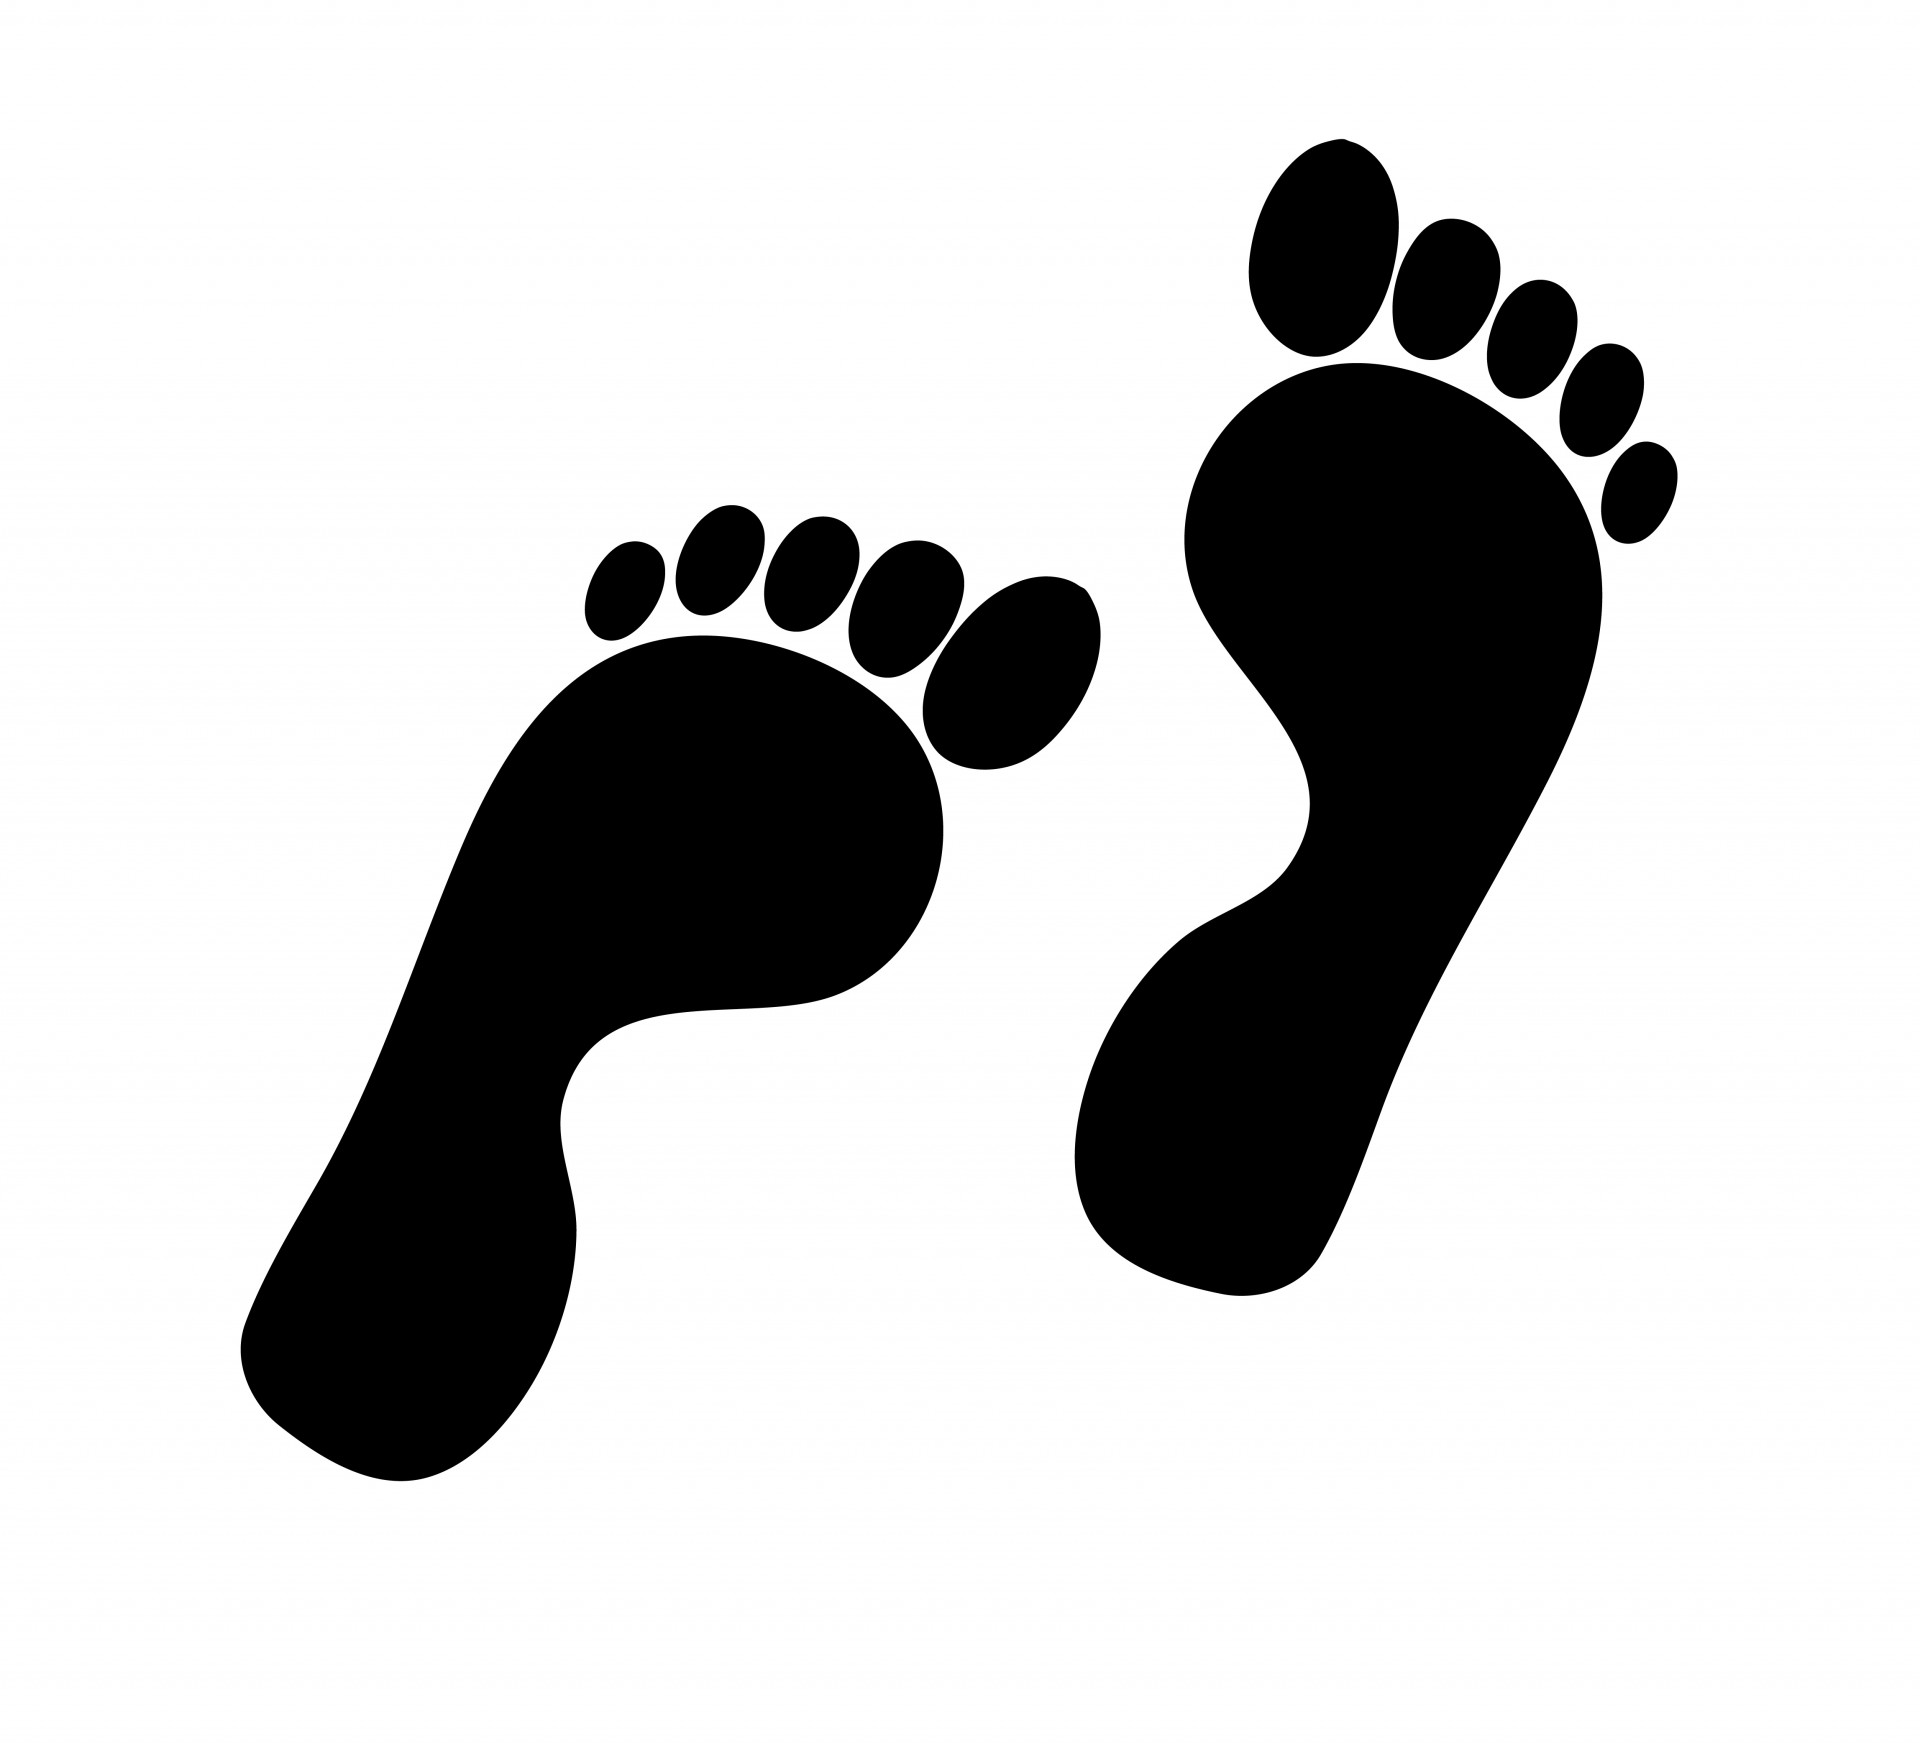 Clip Arts Related To : baby feet clip art. view all Walking Footprint Clipa...